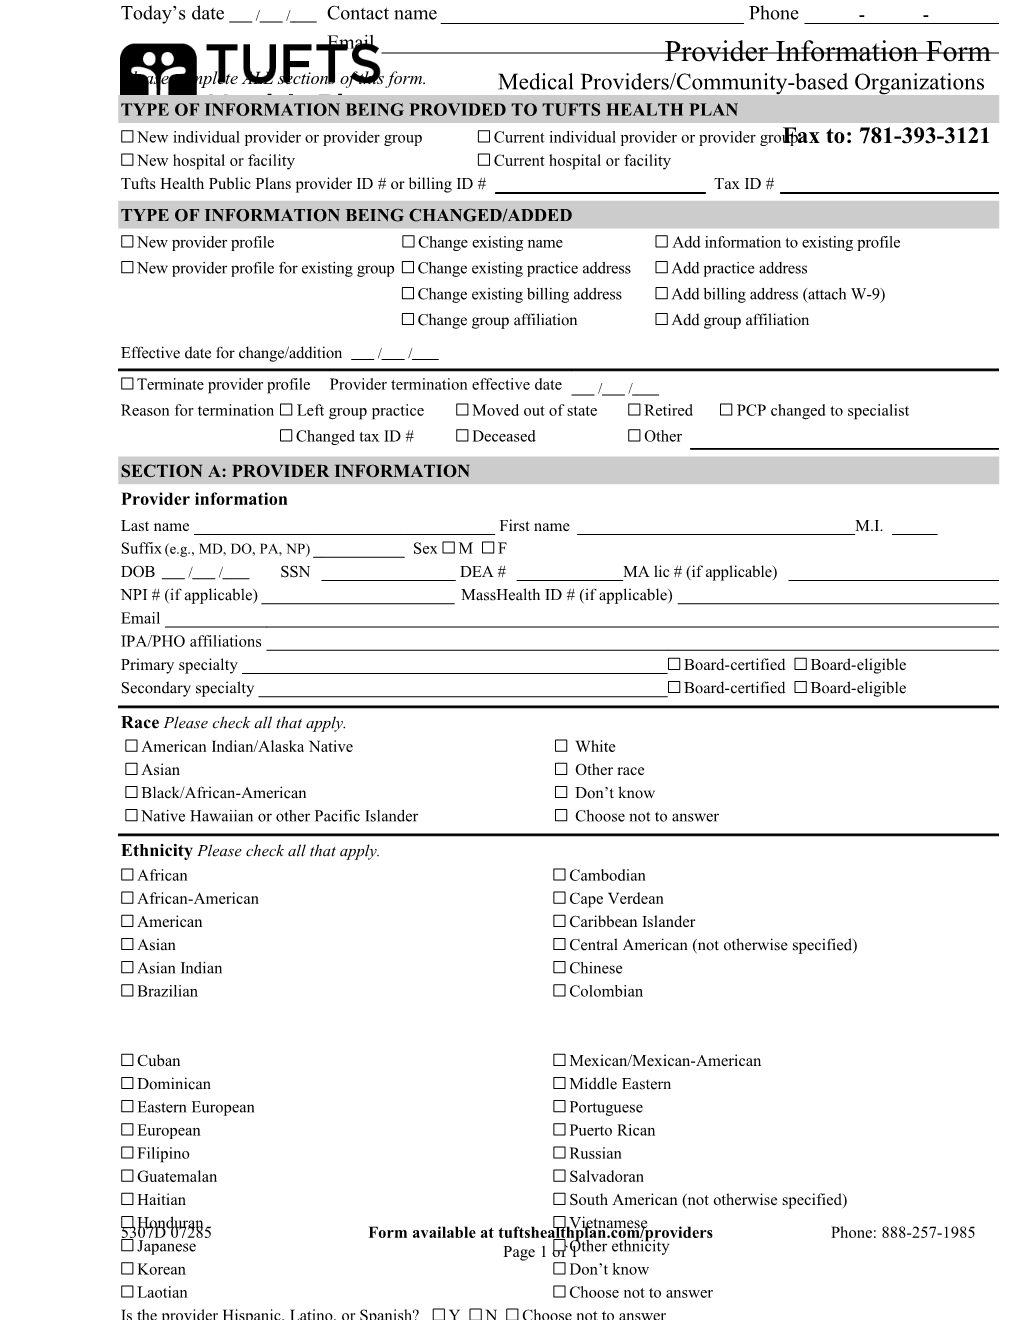 Please Complete ALL Sections of This Form